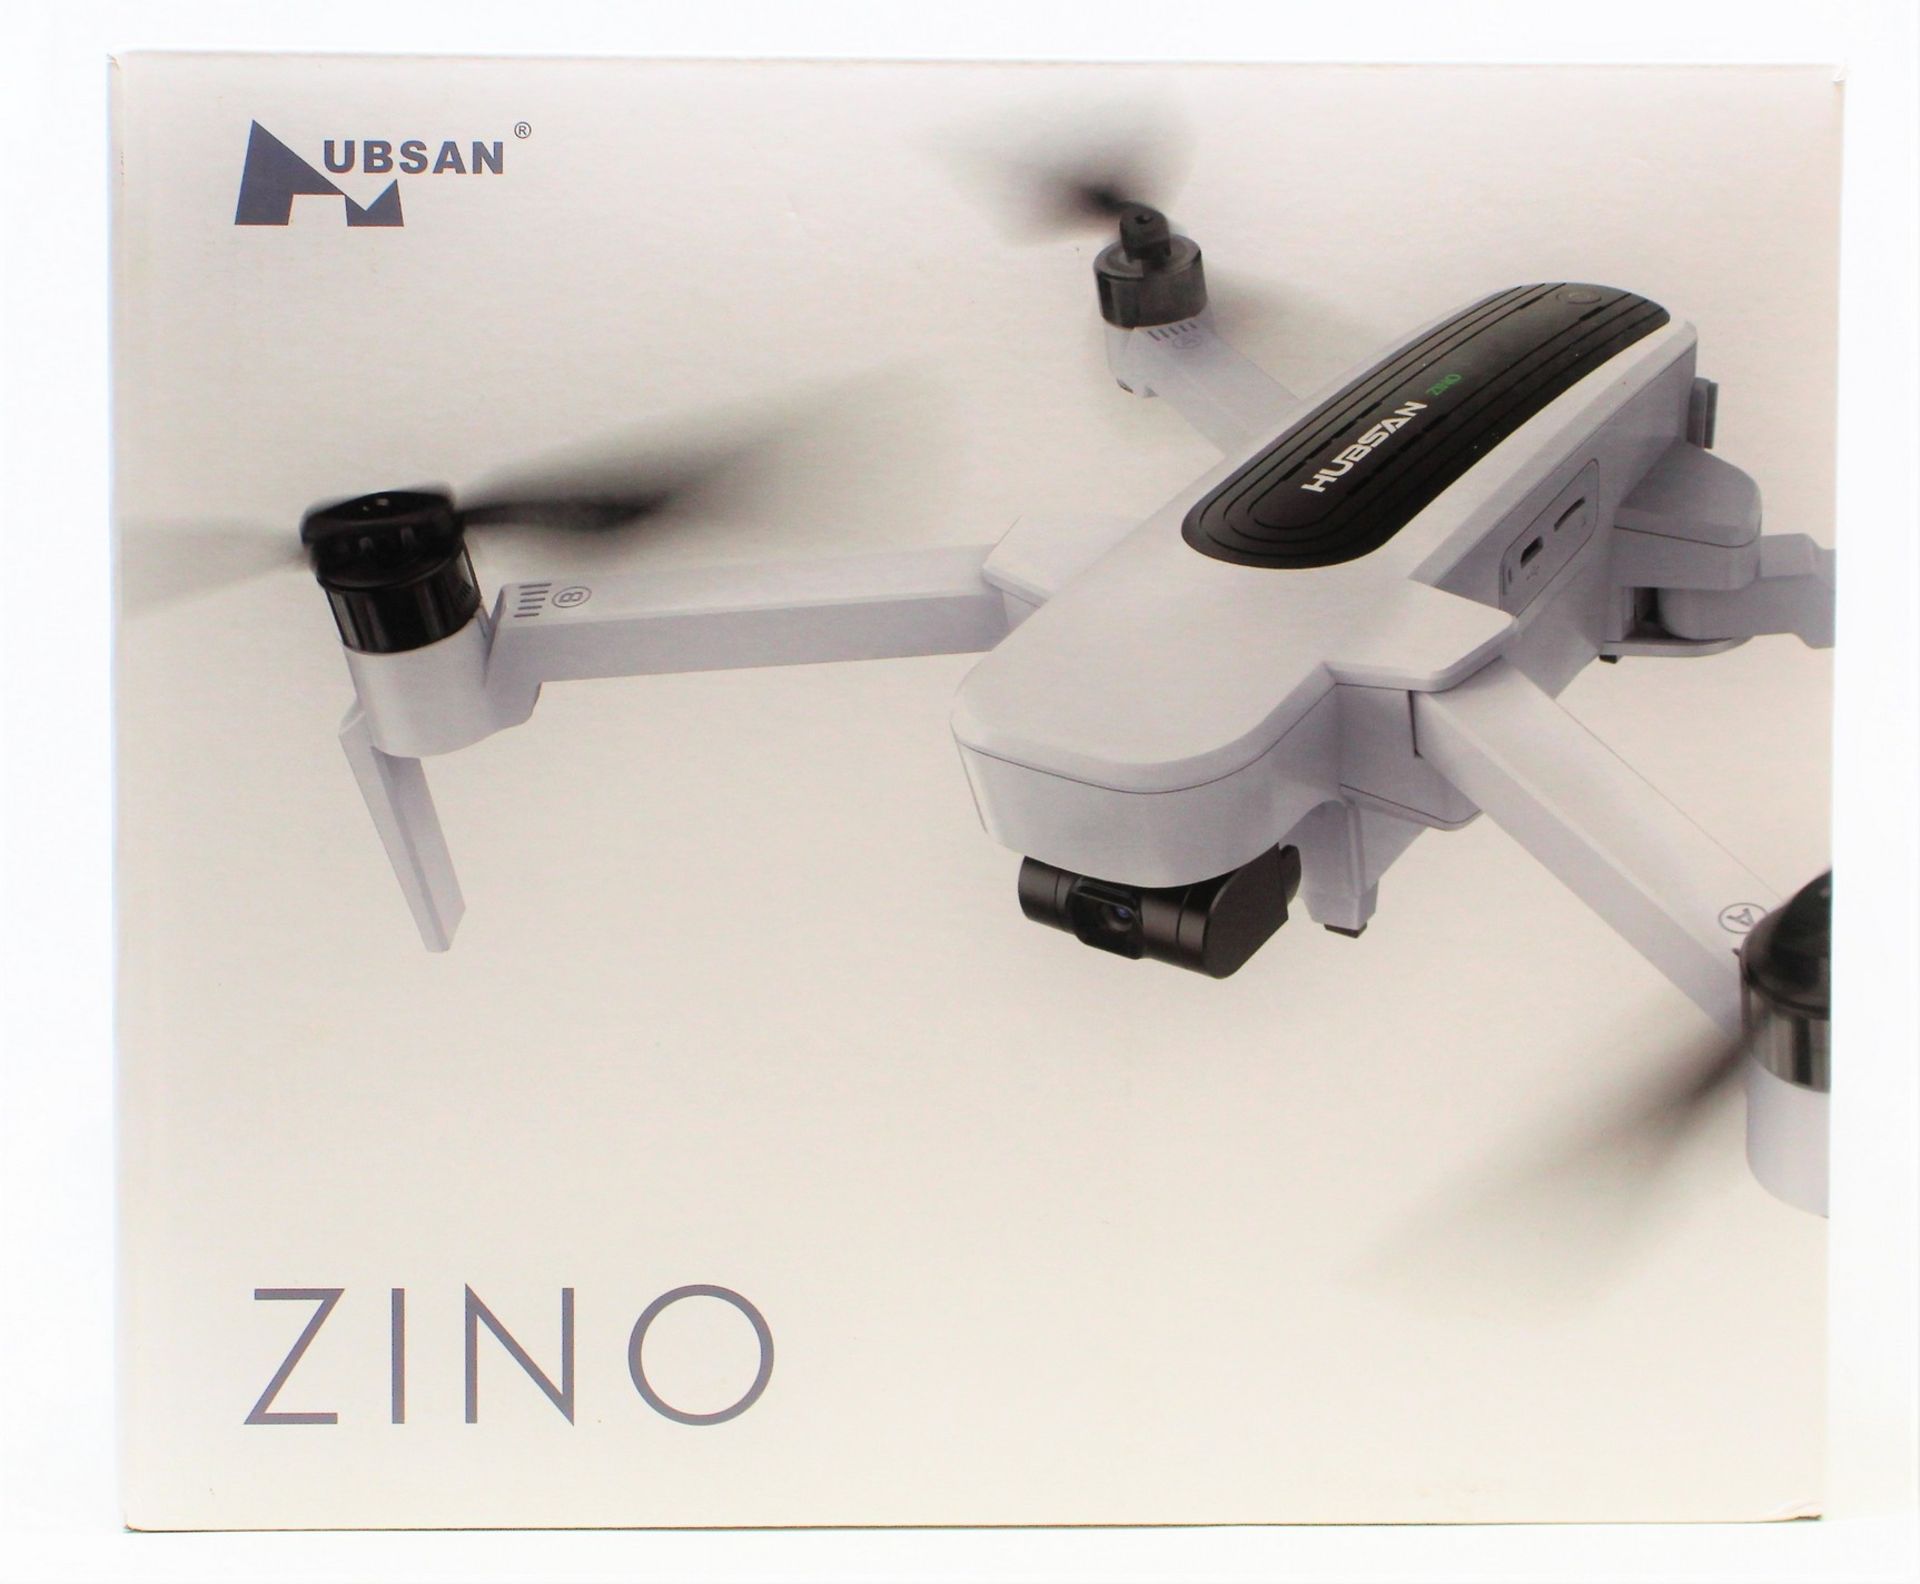 A boxed as new Hubsan Zino Folding Quadcopter Drone with Travel Bag (Box sealed. UK plug adapter